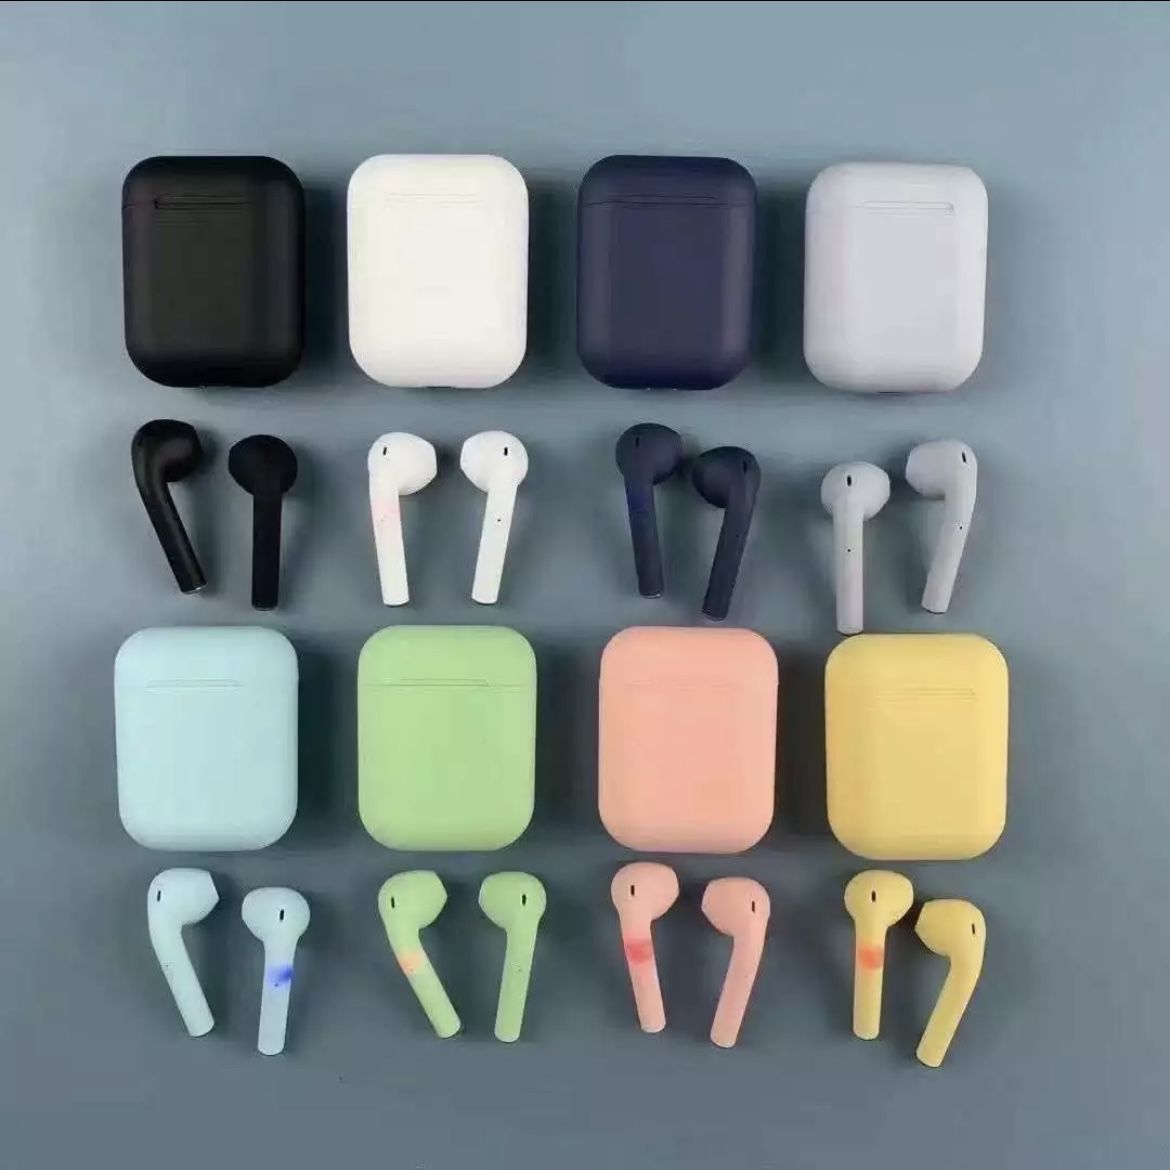 Hot Sale Bluetooth Wireless Earbuds - Different colors 